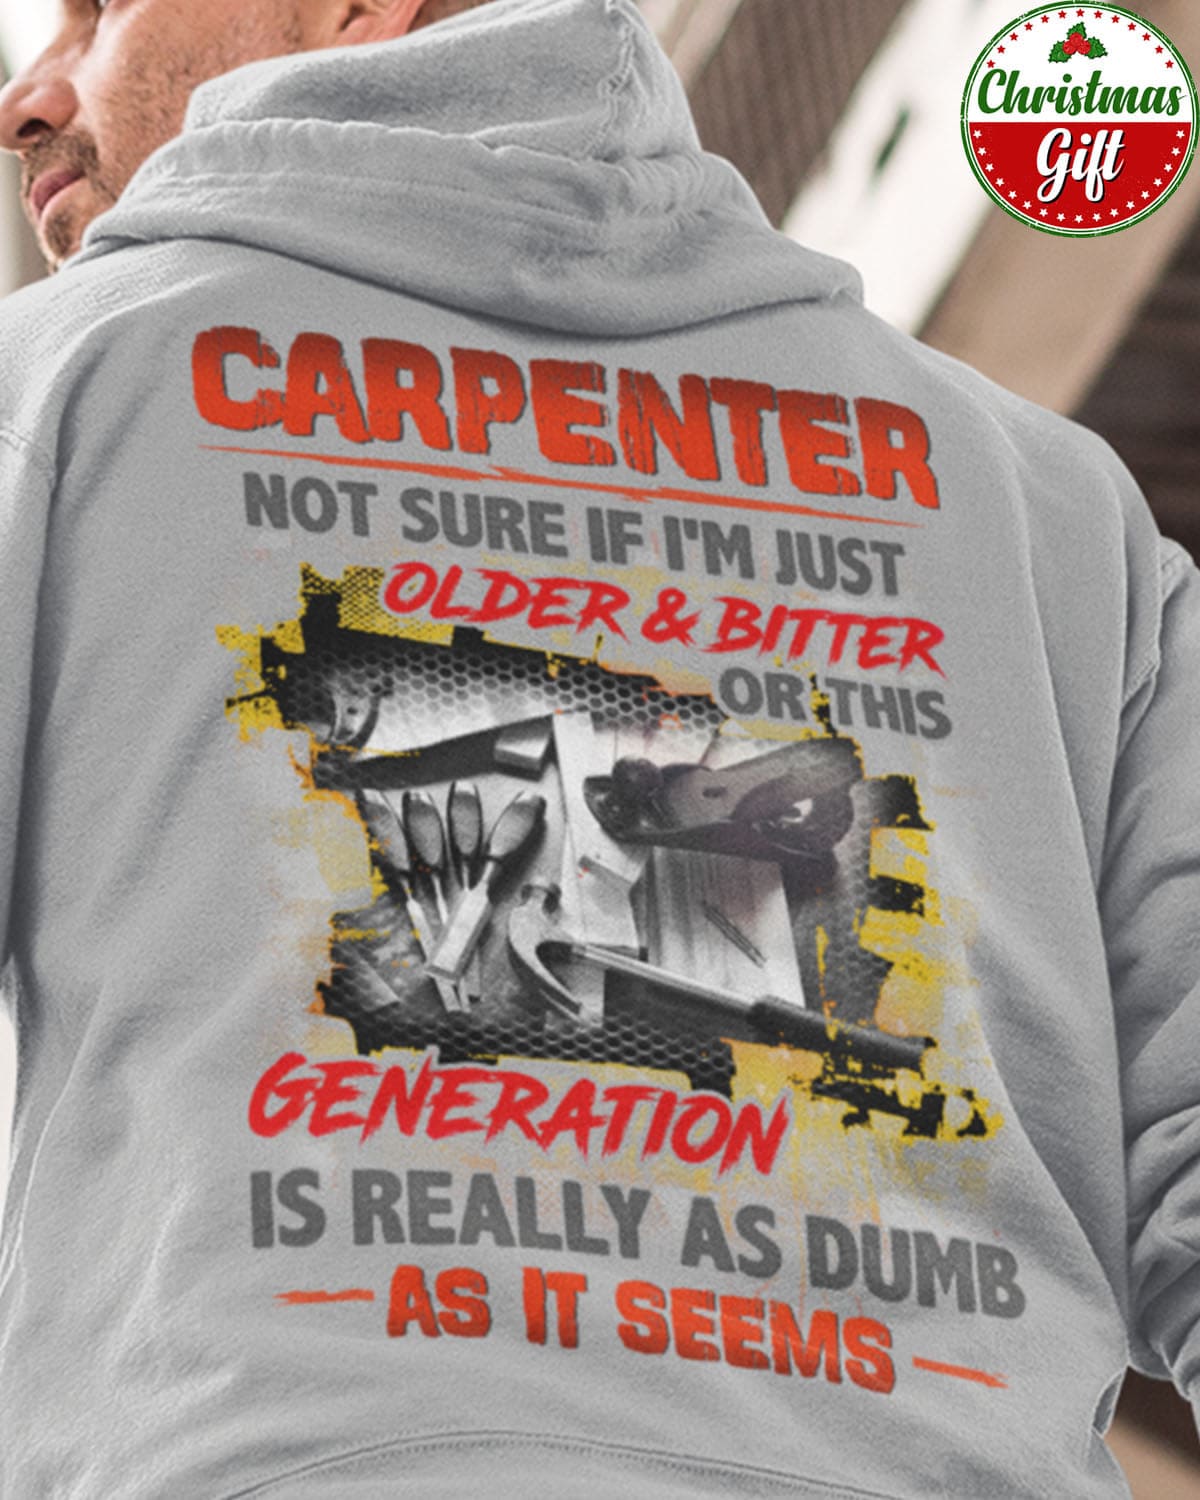 Carpenter The Job - Carpenter not sure if i'm just older and bitter or this generation is really as dumb as it seems